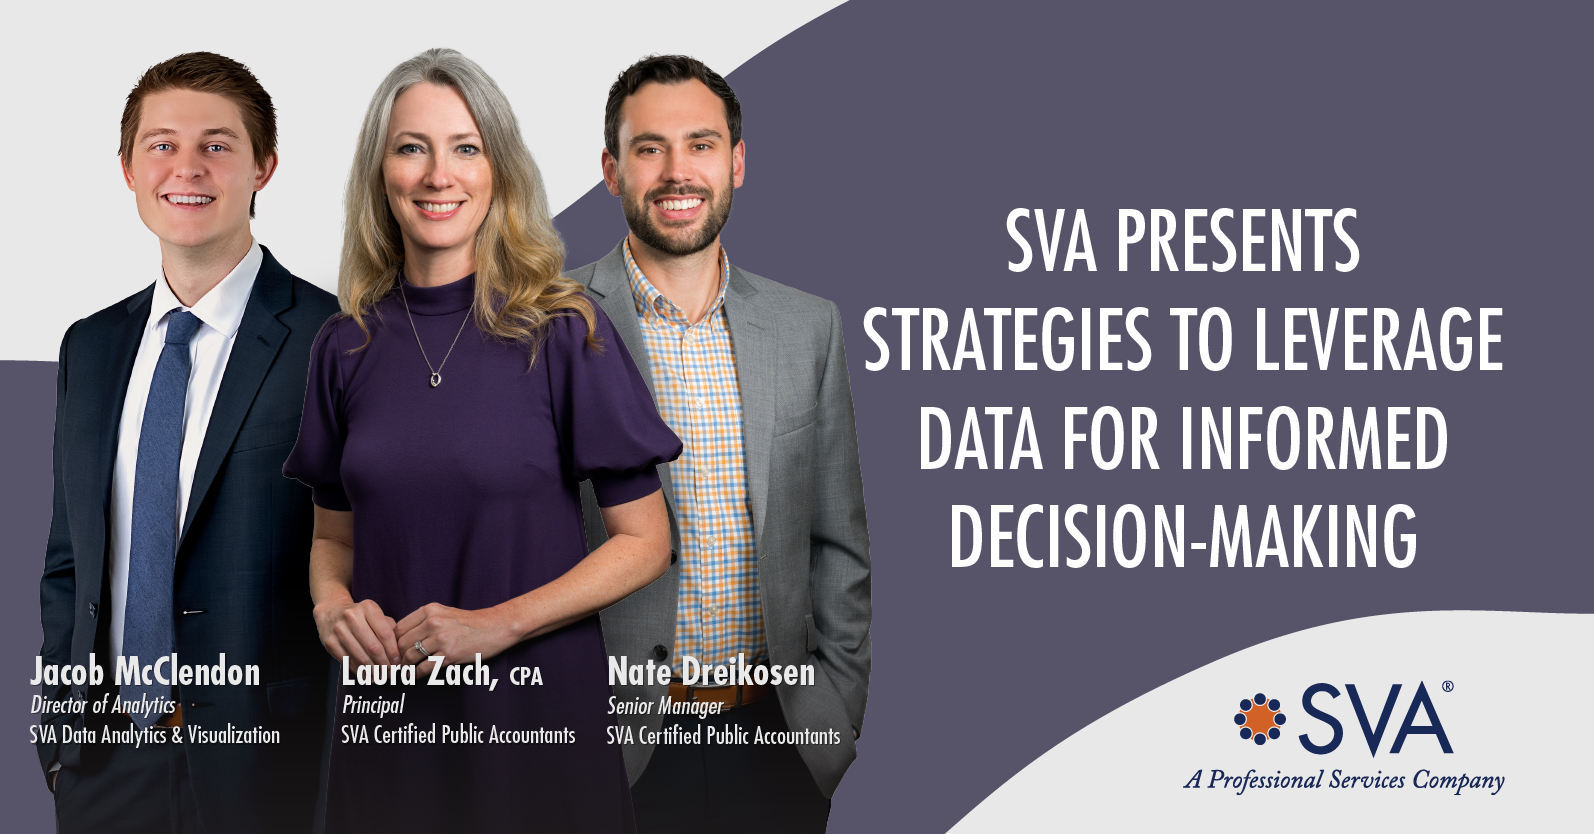 sva-presents-strategies-to-leverage-data-for-informed-decision-making